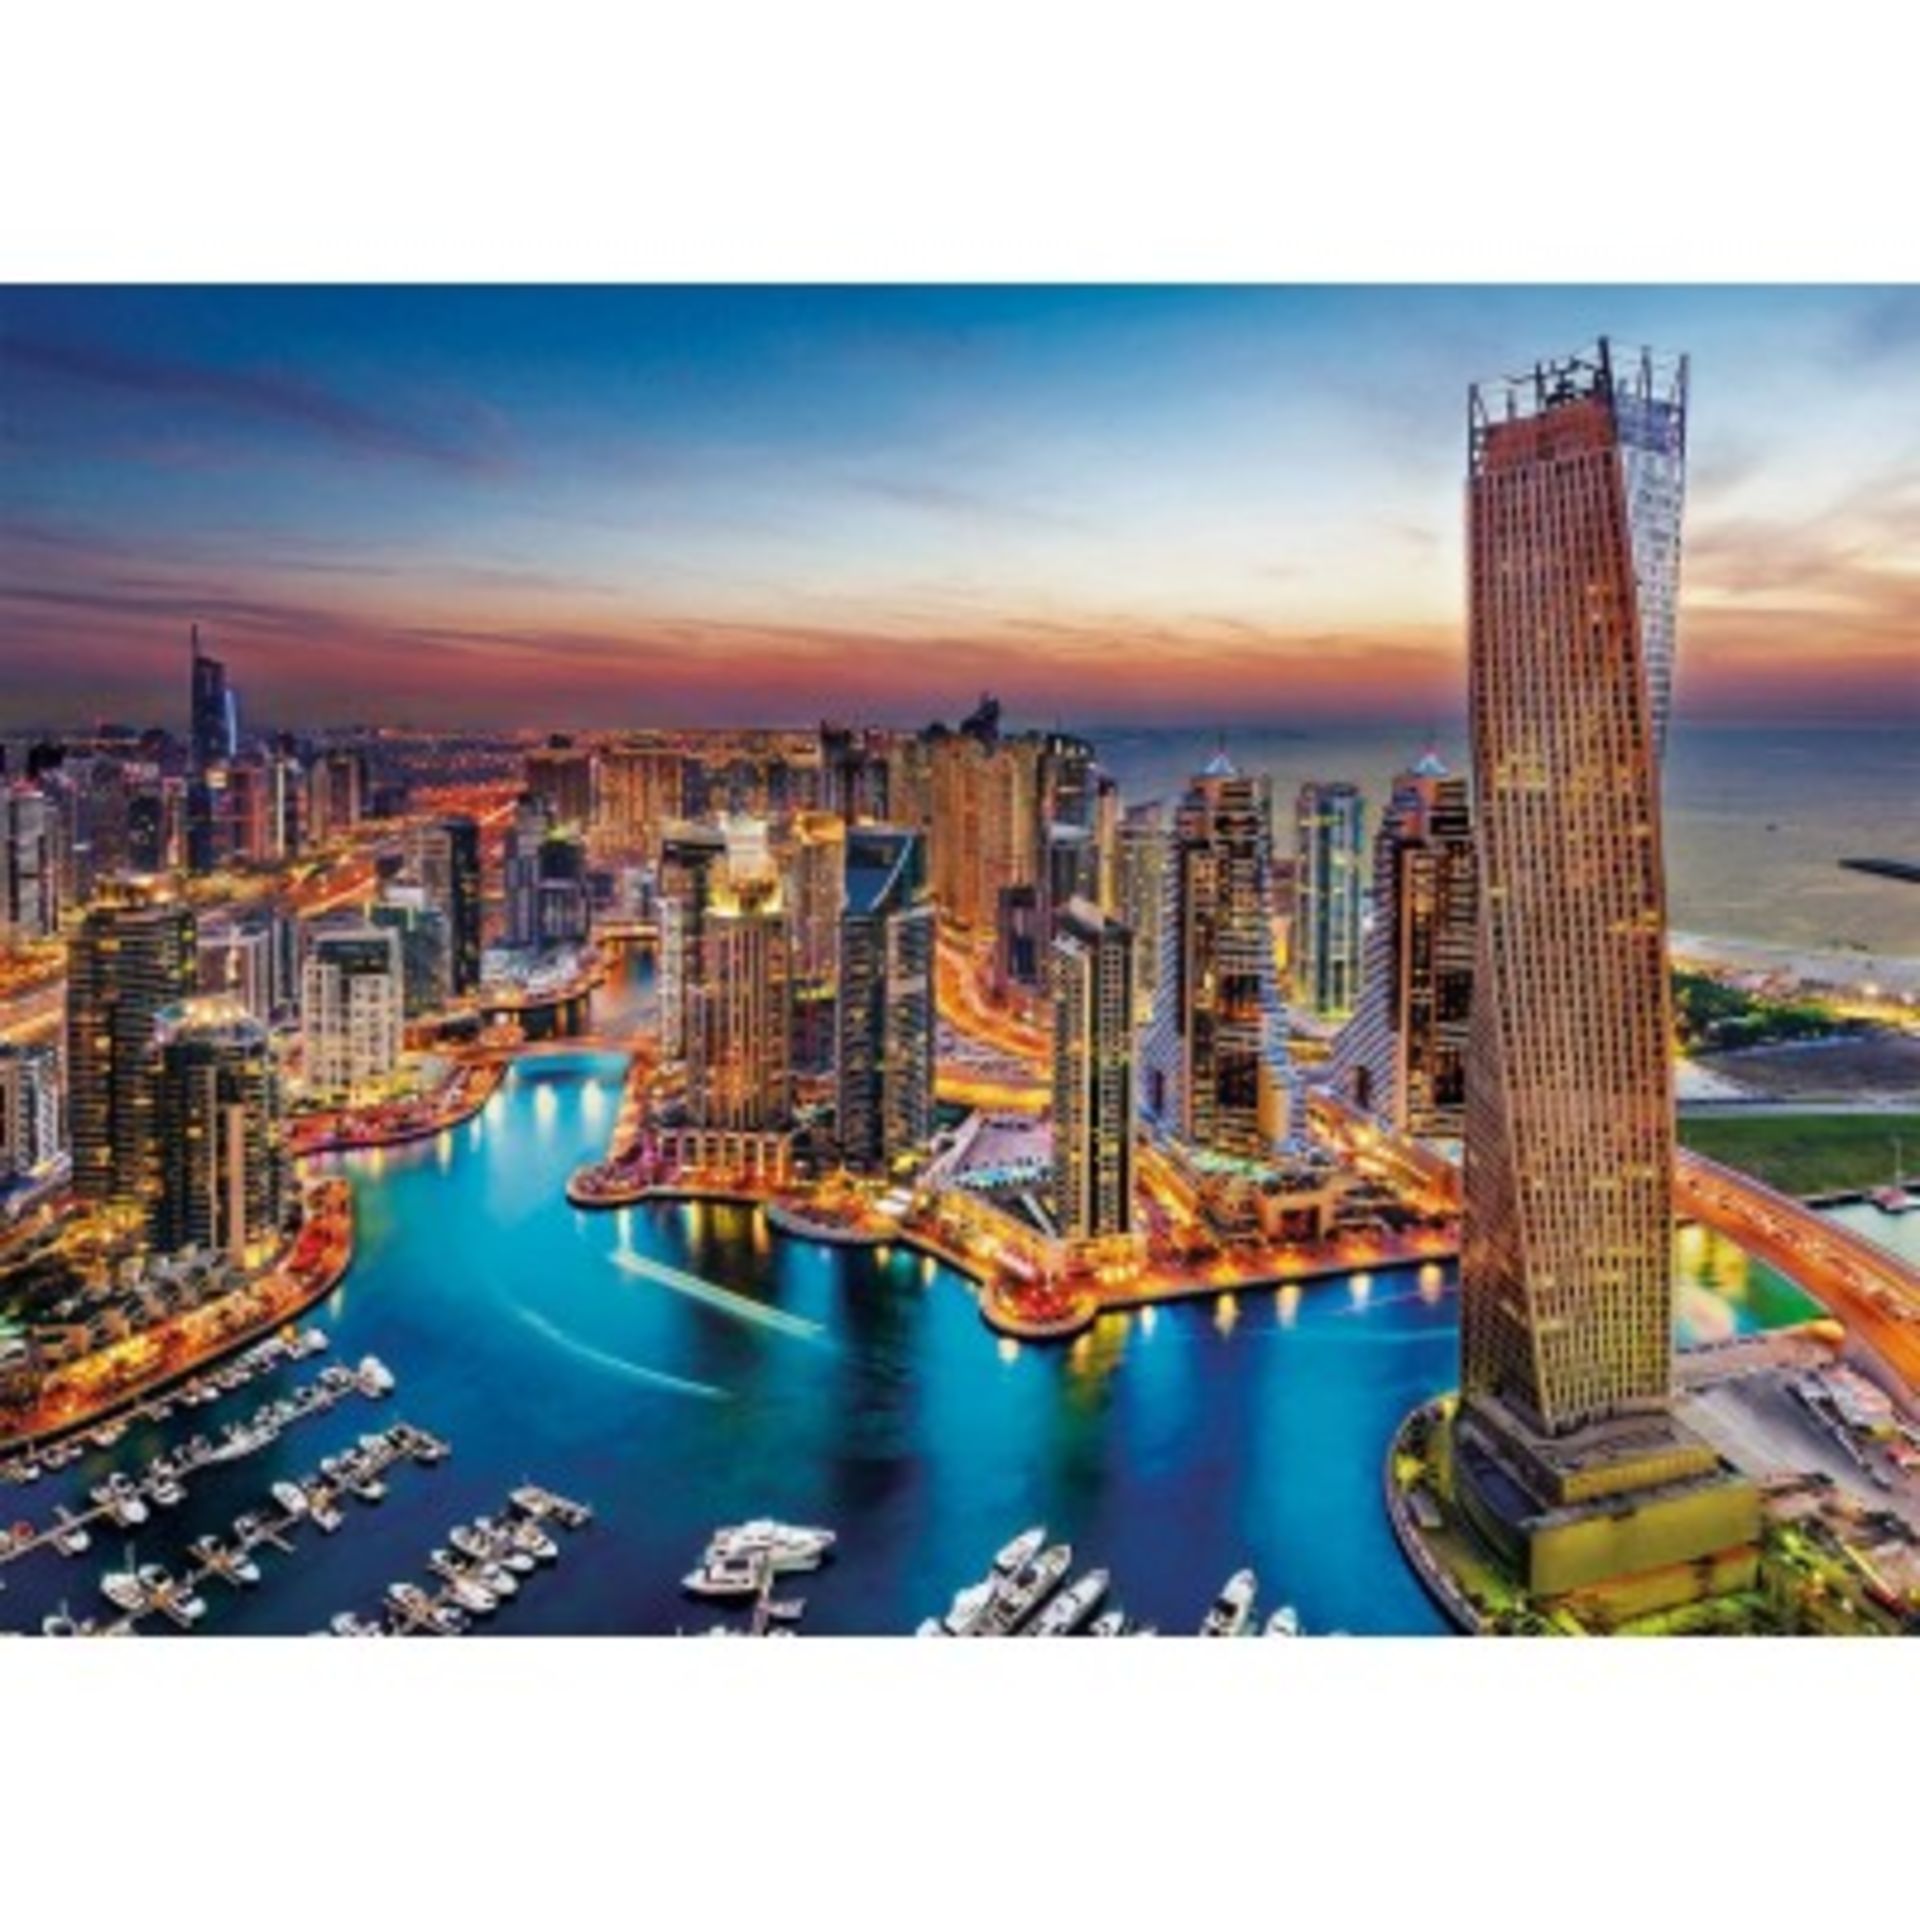 RRP - £12.54 Clementoni - 31814 - Collection Puzzle - Dubai Marina - 1500 pieces - Made in Italy - J